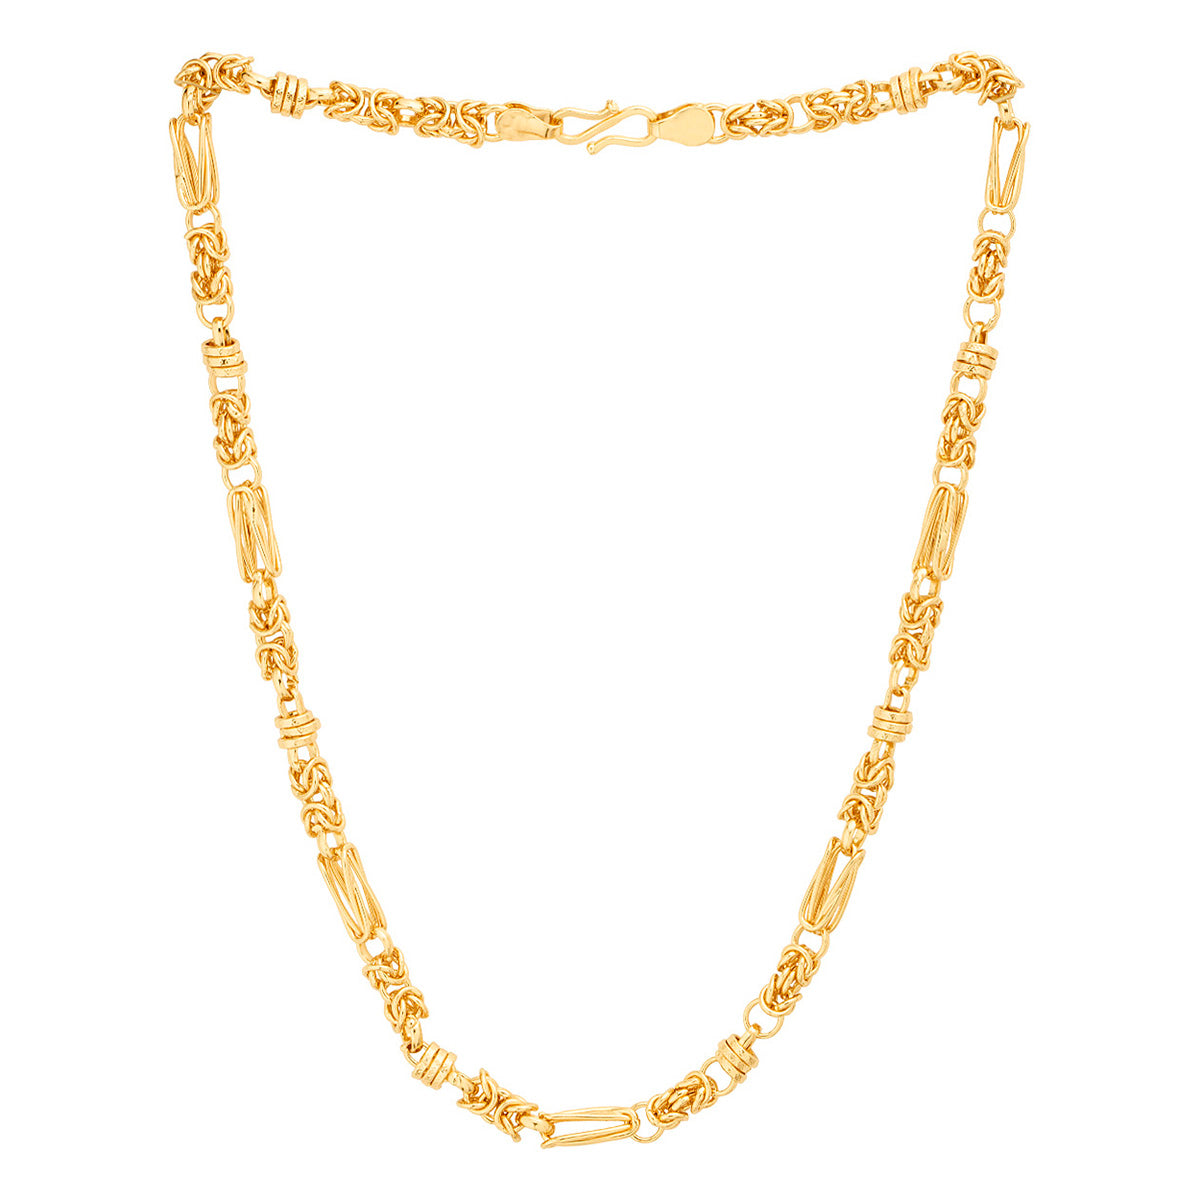 Elegant Bold Link Chain with Gold Plating